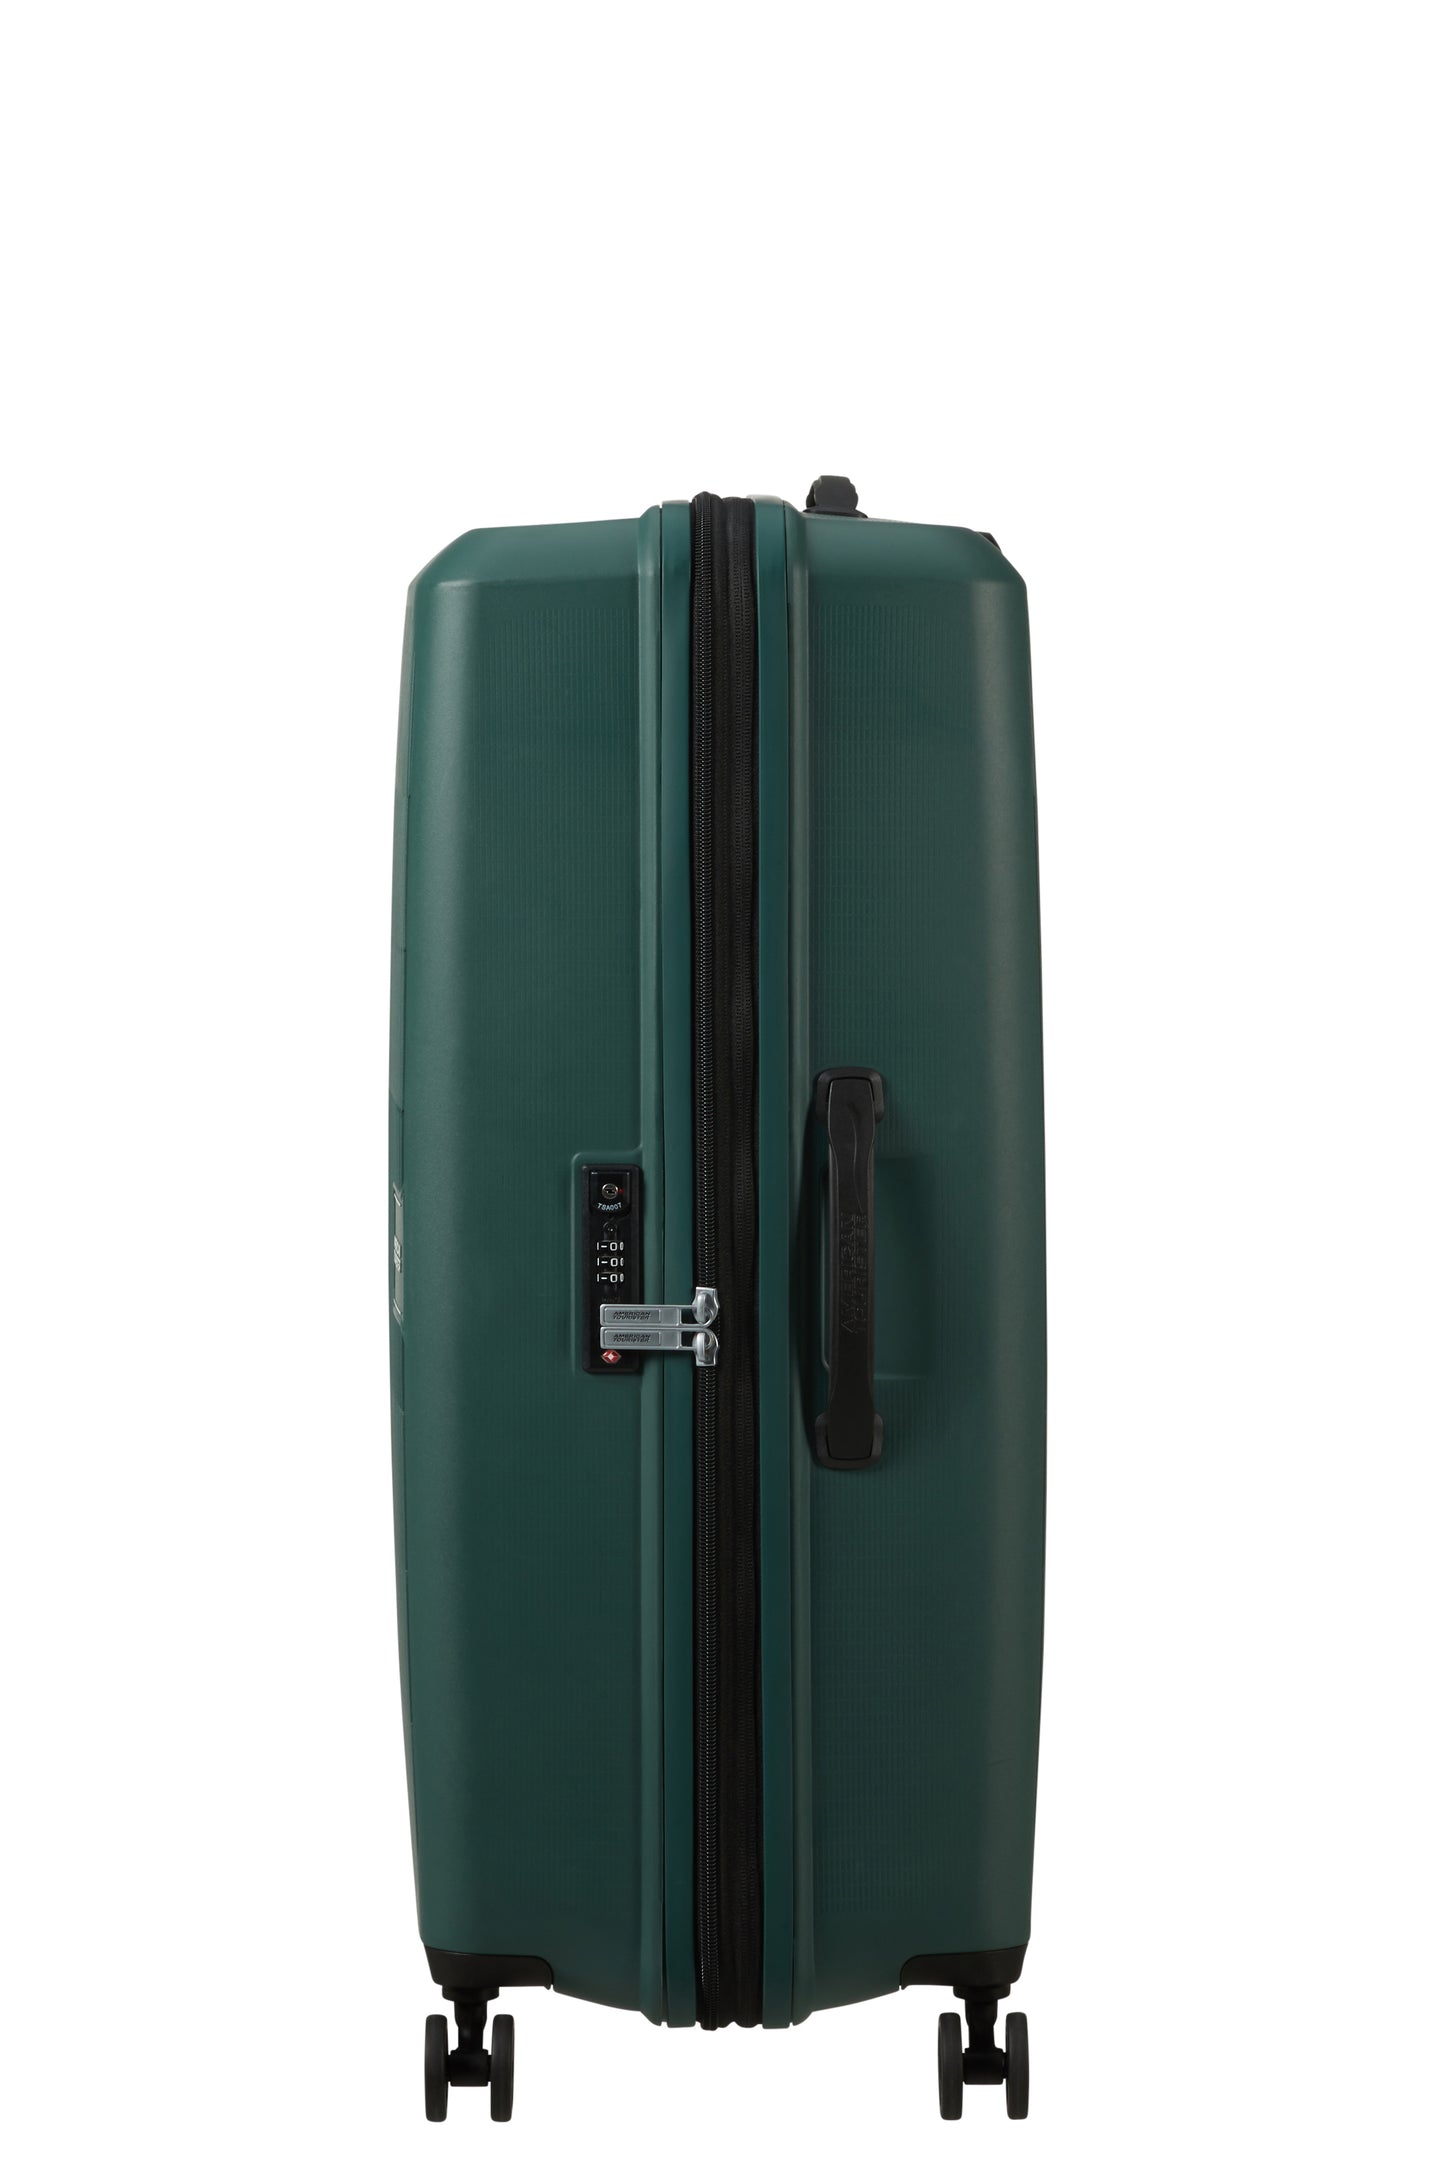 American Tourister AEROSTEP spinner 77 exp  forest